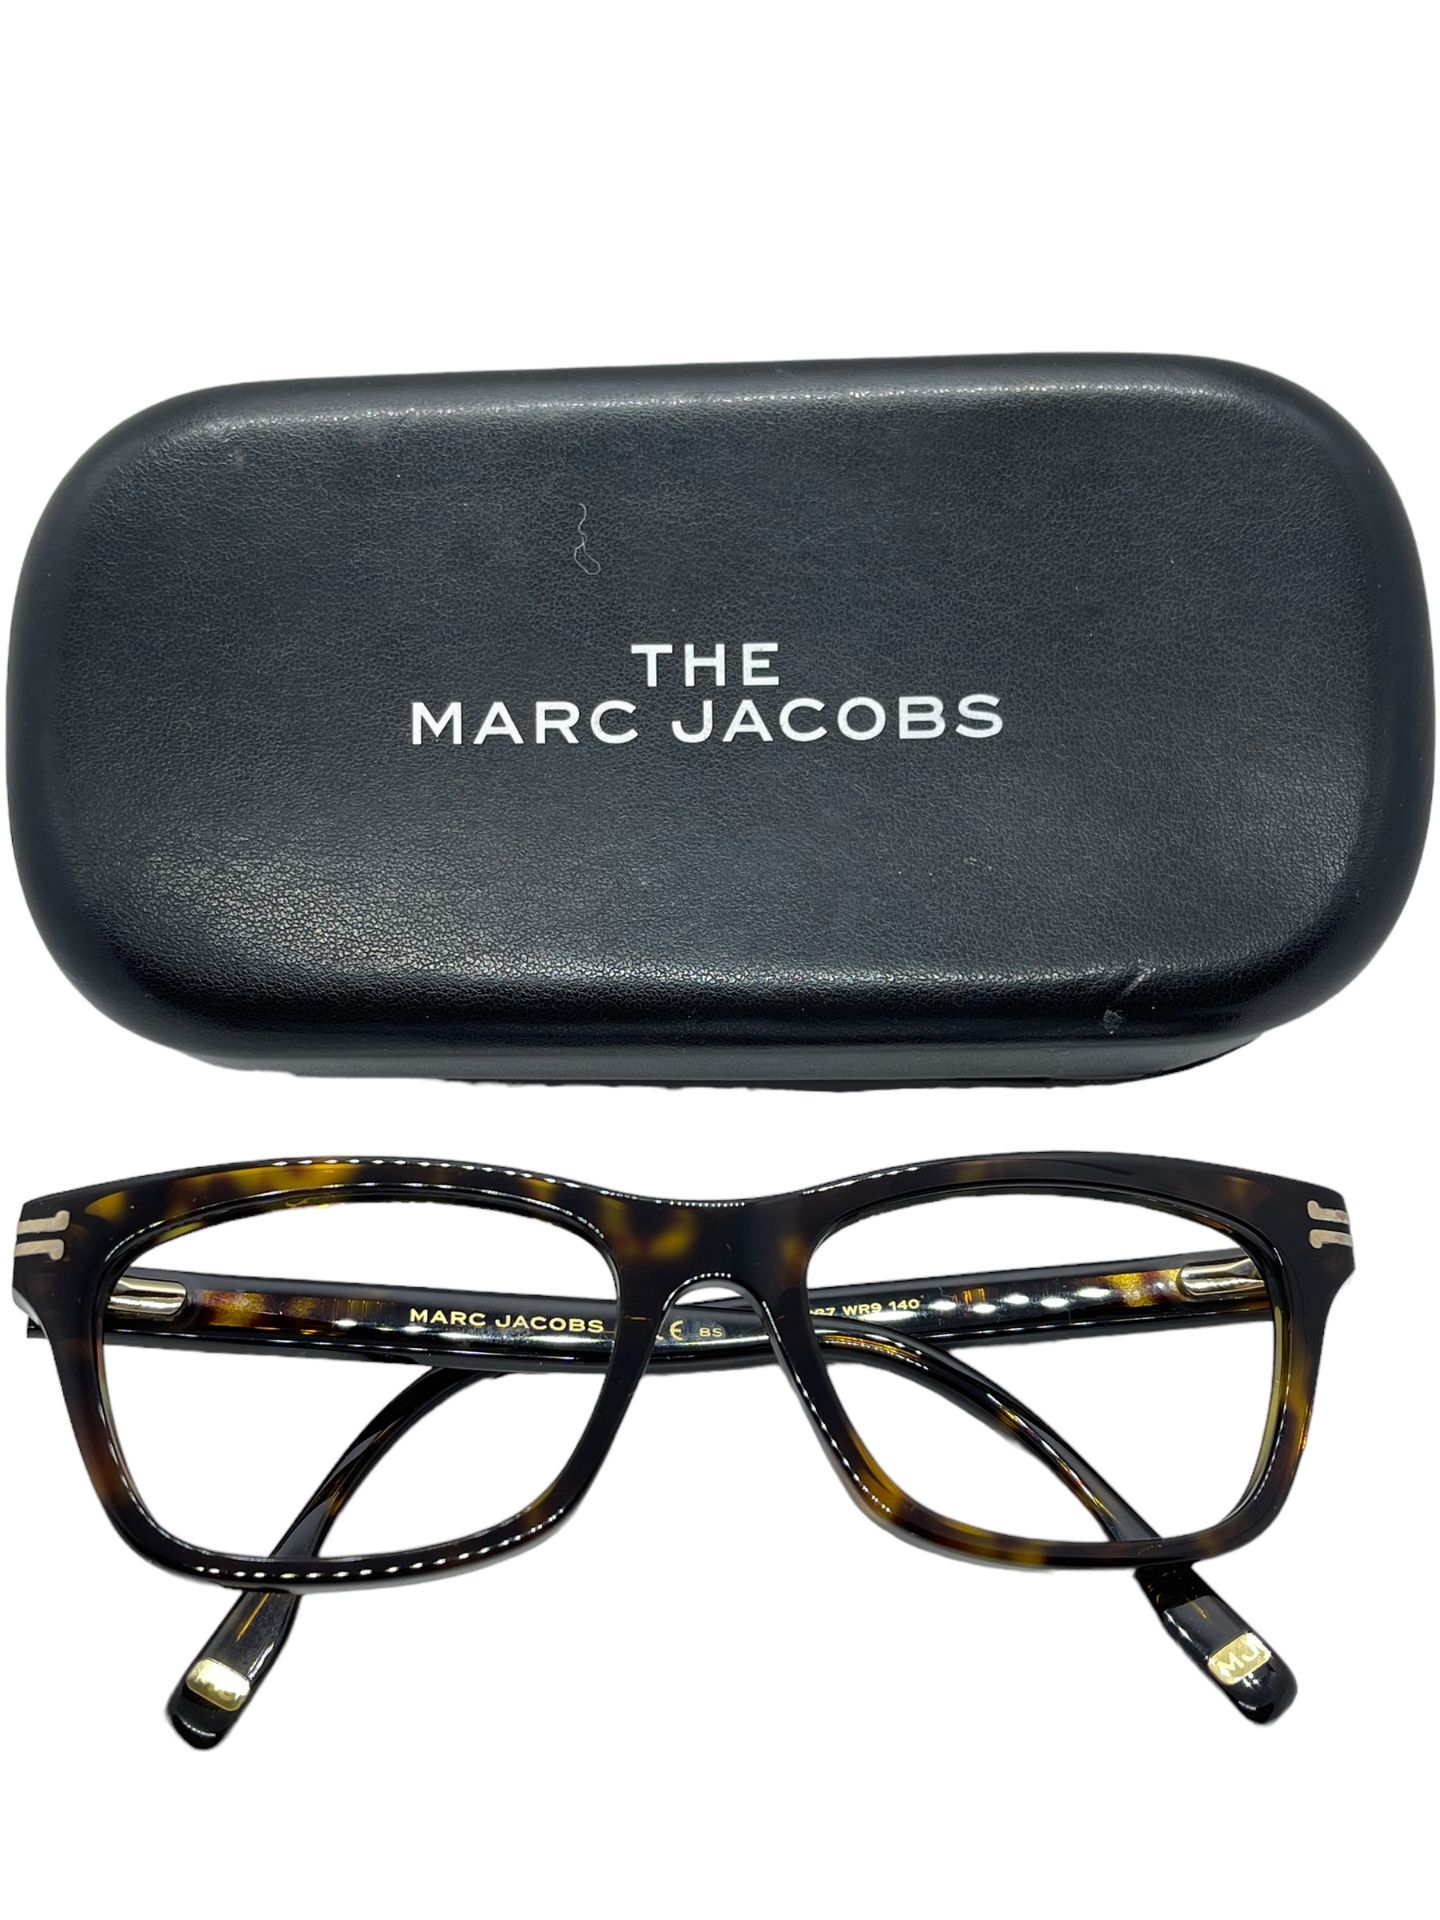 Marc Jacob's new spectacles mens. - Image 8 of 9